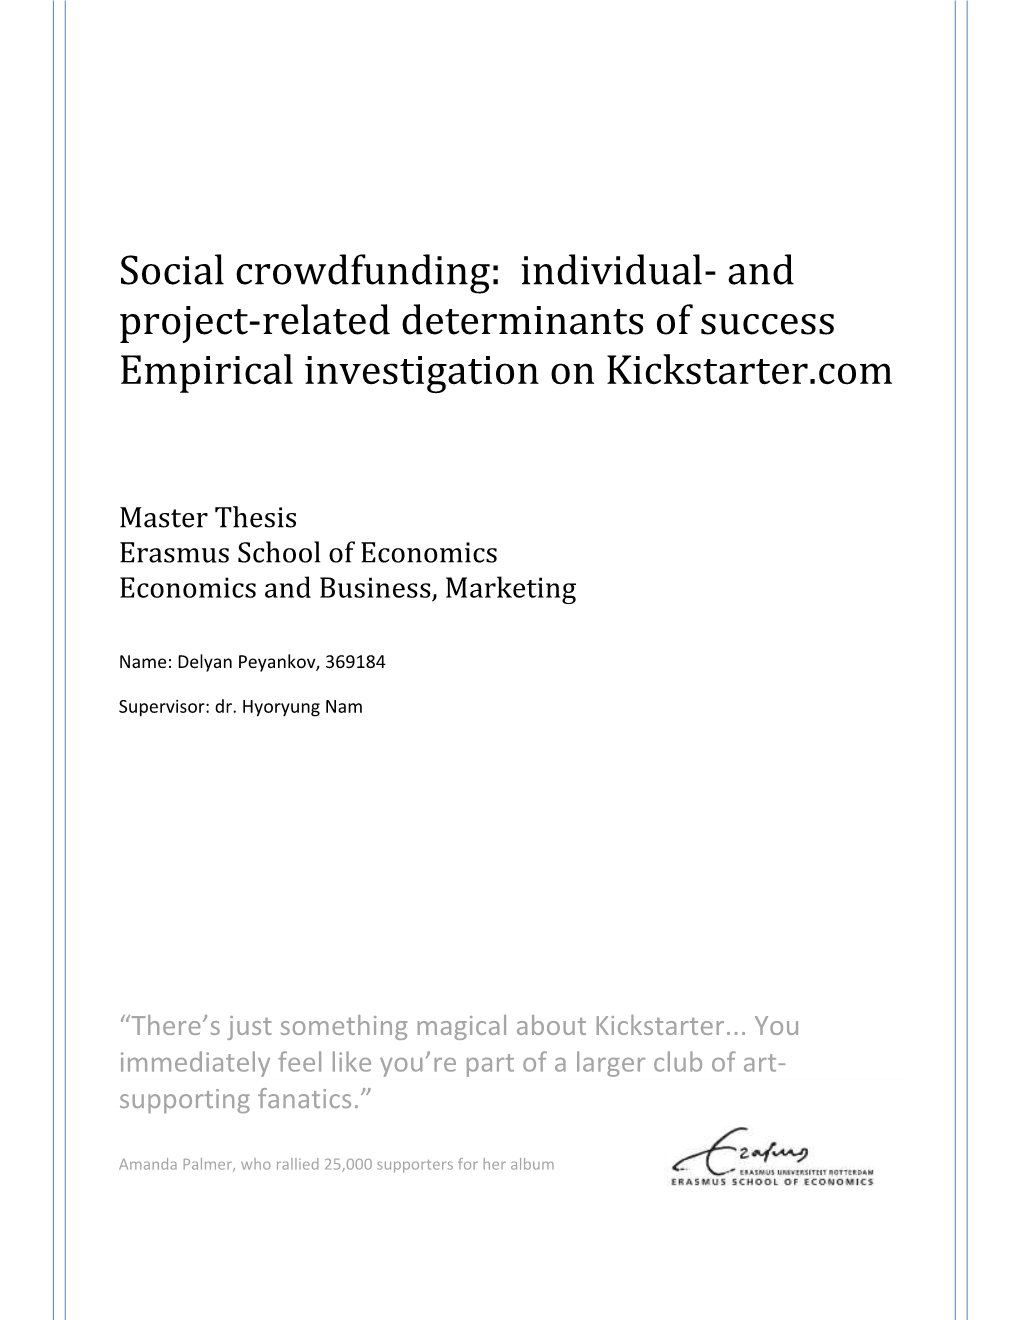 Social Crowdfunding: Individual- and Project-Related Determinants of Success Empirical Investigation on Kickstarter.Com